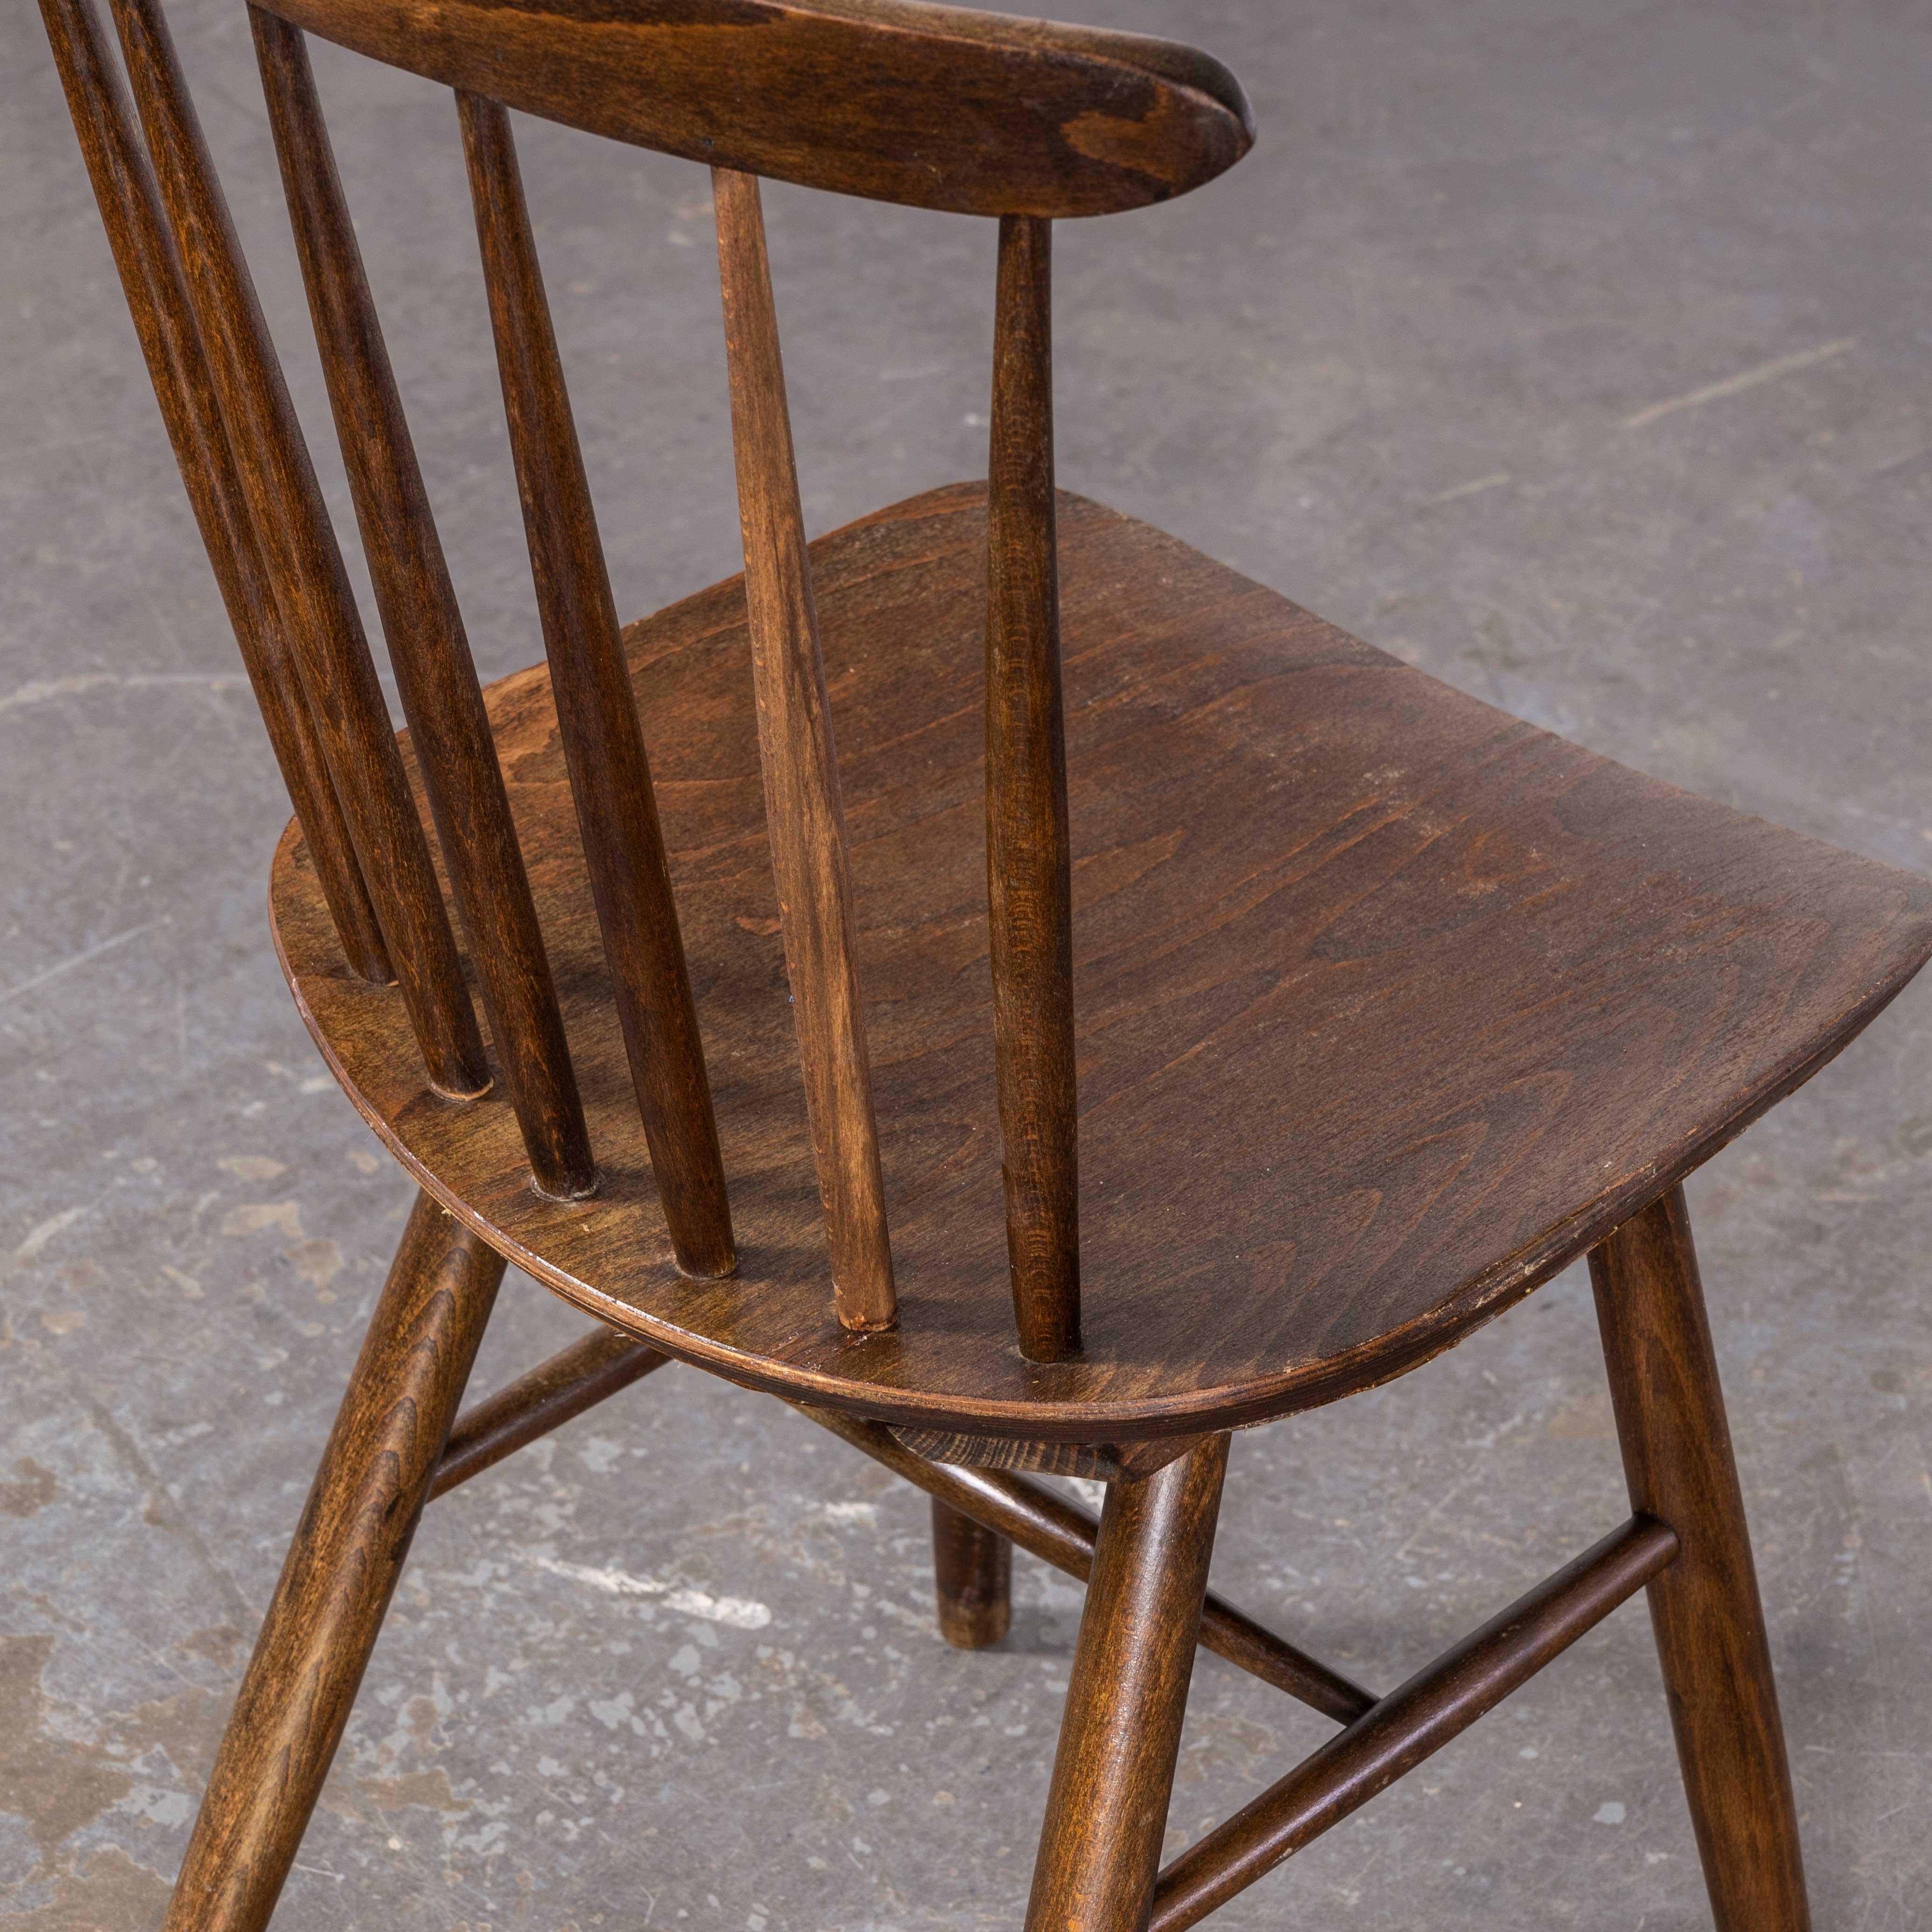 1950s Dark Walnut Stickback Chairs – Saddle Seat – By Ton – Set Of Four
1950s Dark Walnut Stickback Chairs – Saddle Seat – By Ton – Set Of Four. These chairs were produced by the famous Czech firm Ton, a post war spin off from the famous Thonet